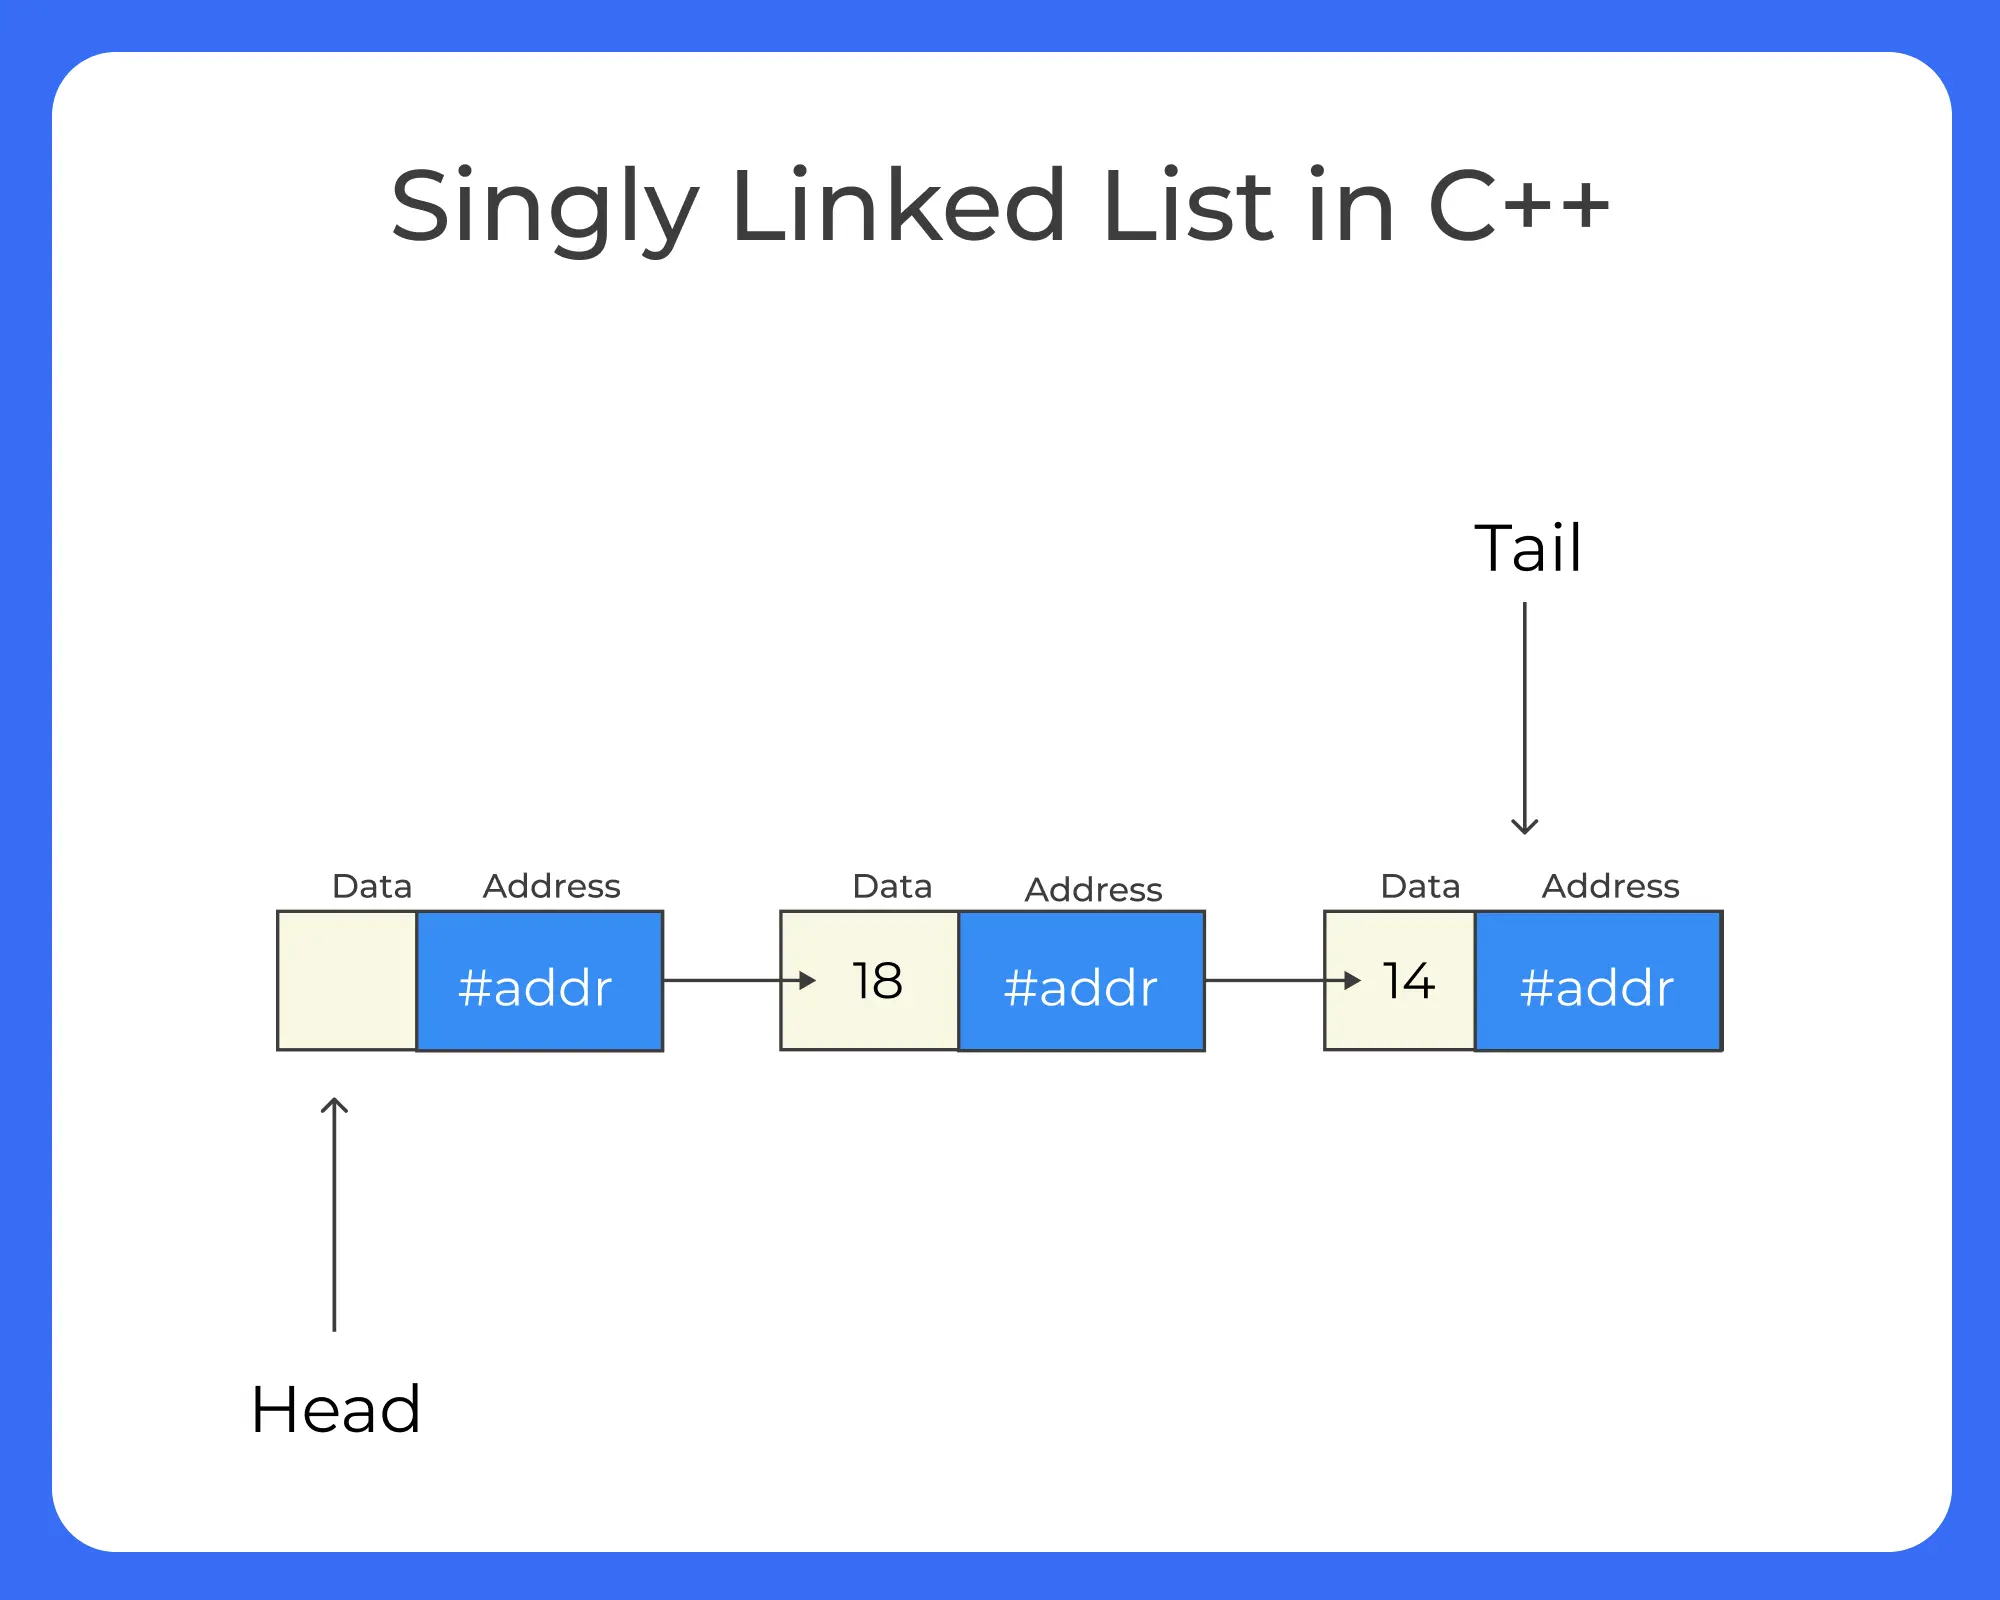 Singly linked list in C++